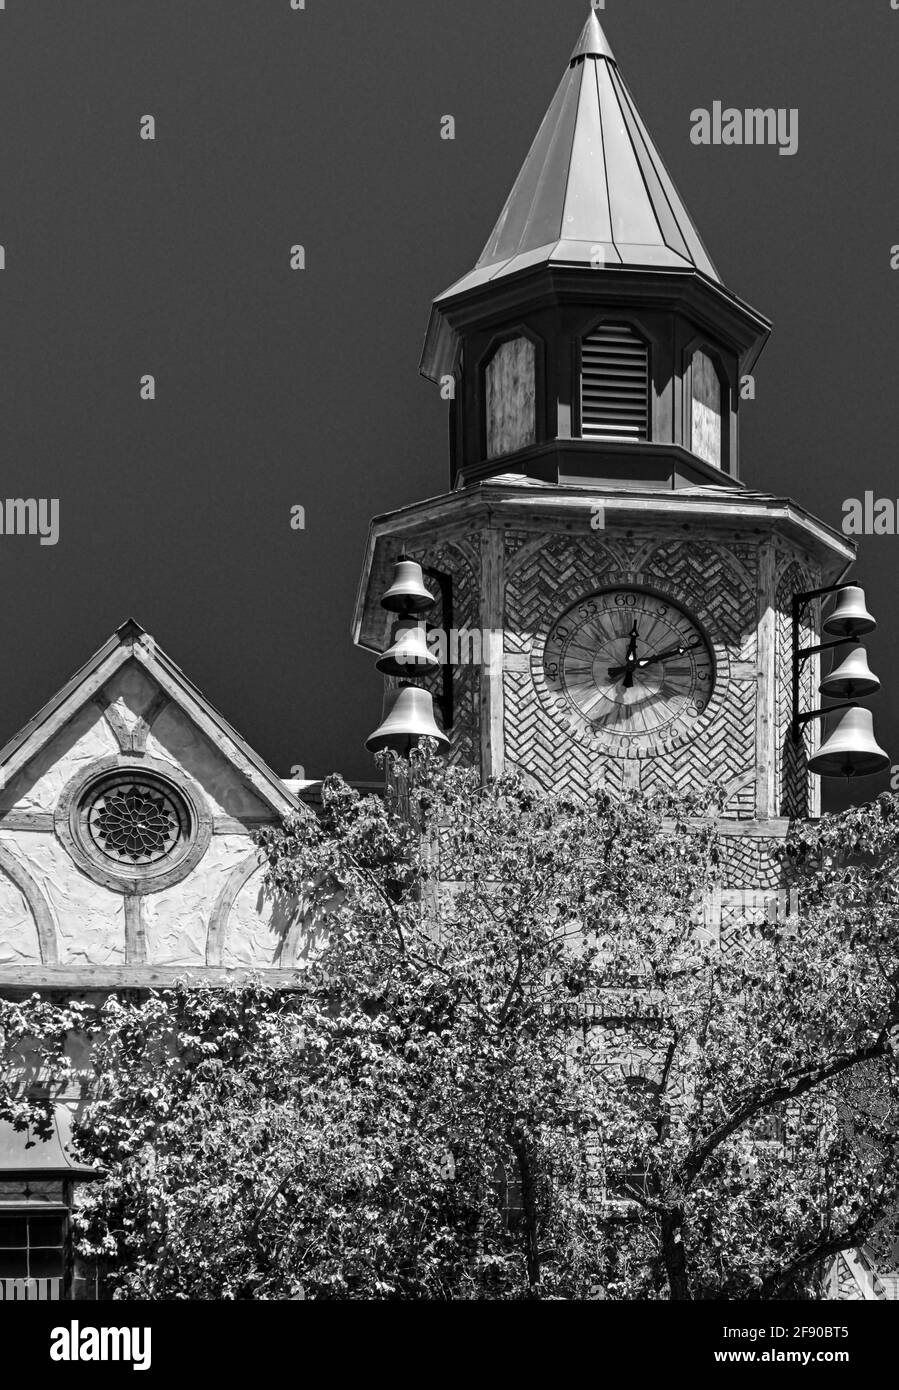 Architectural details of whimsey and texture in black and white of the Old Mill House Clock Tower in Solvang, CA , USA Stock Photo